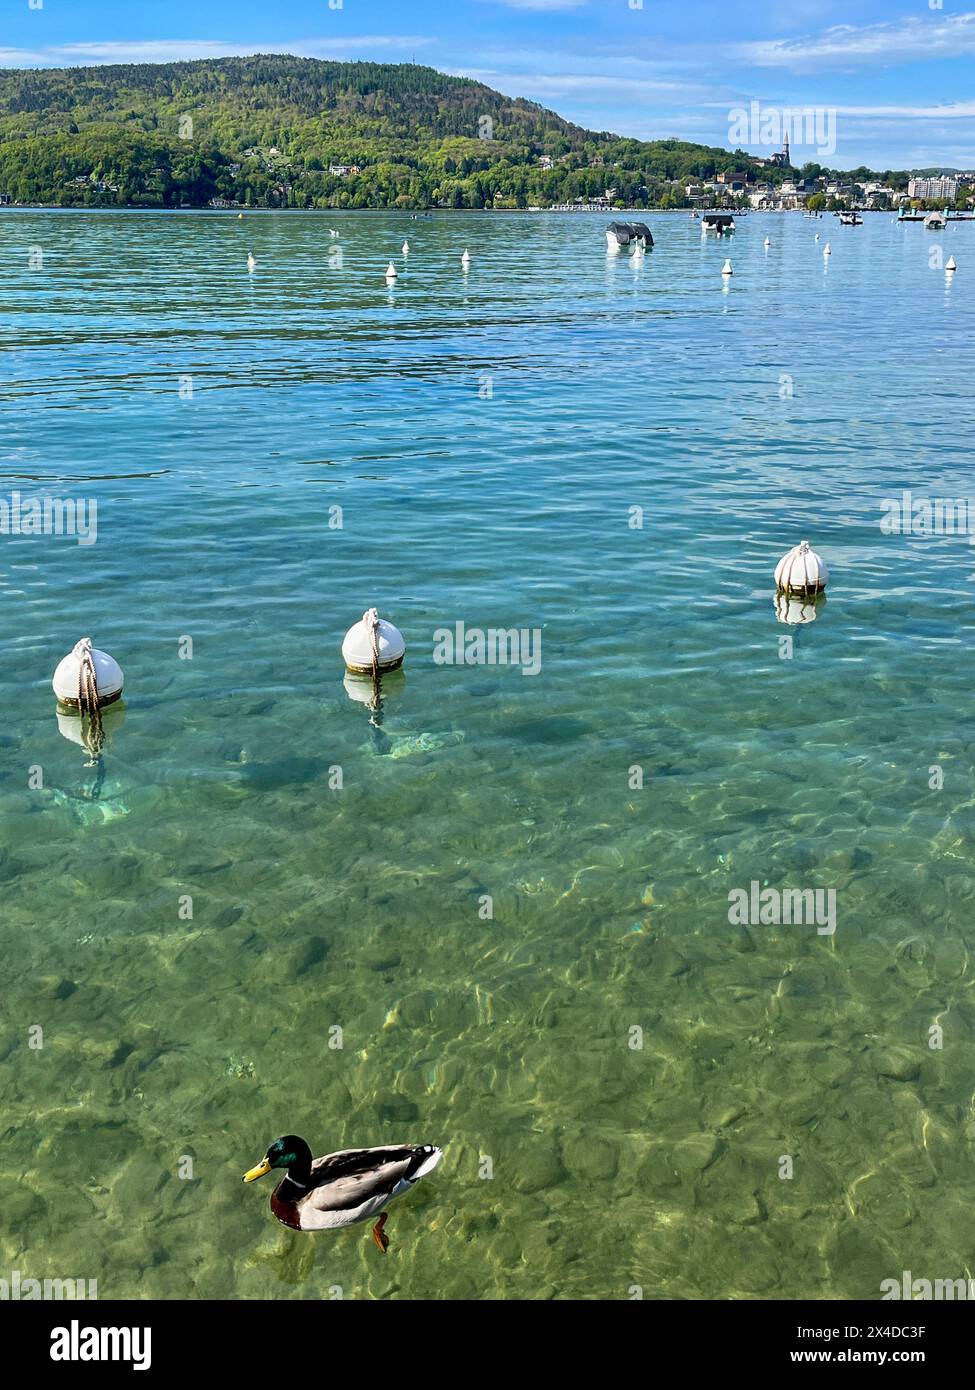 Haute-Savoie, France: a duck in the Annecy lake, known for being the cleanest in Europe due to strict environmental regulations in place since 1960s Stock Photo